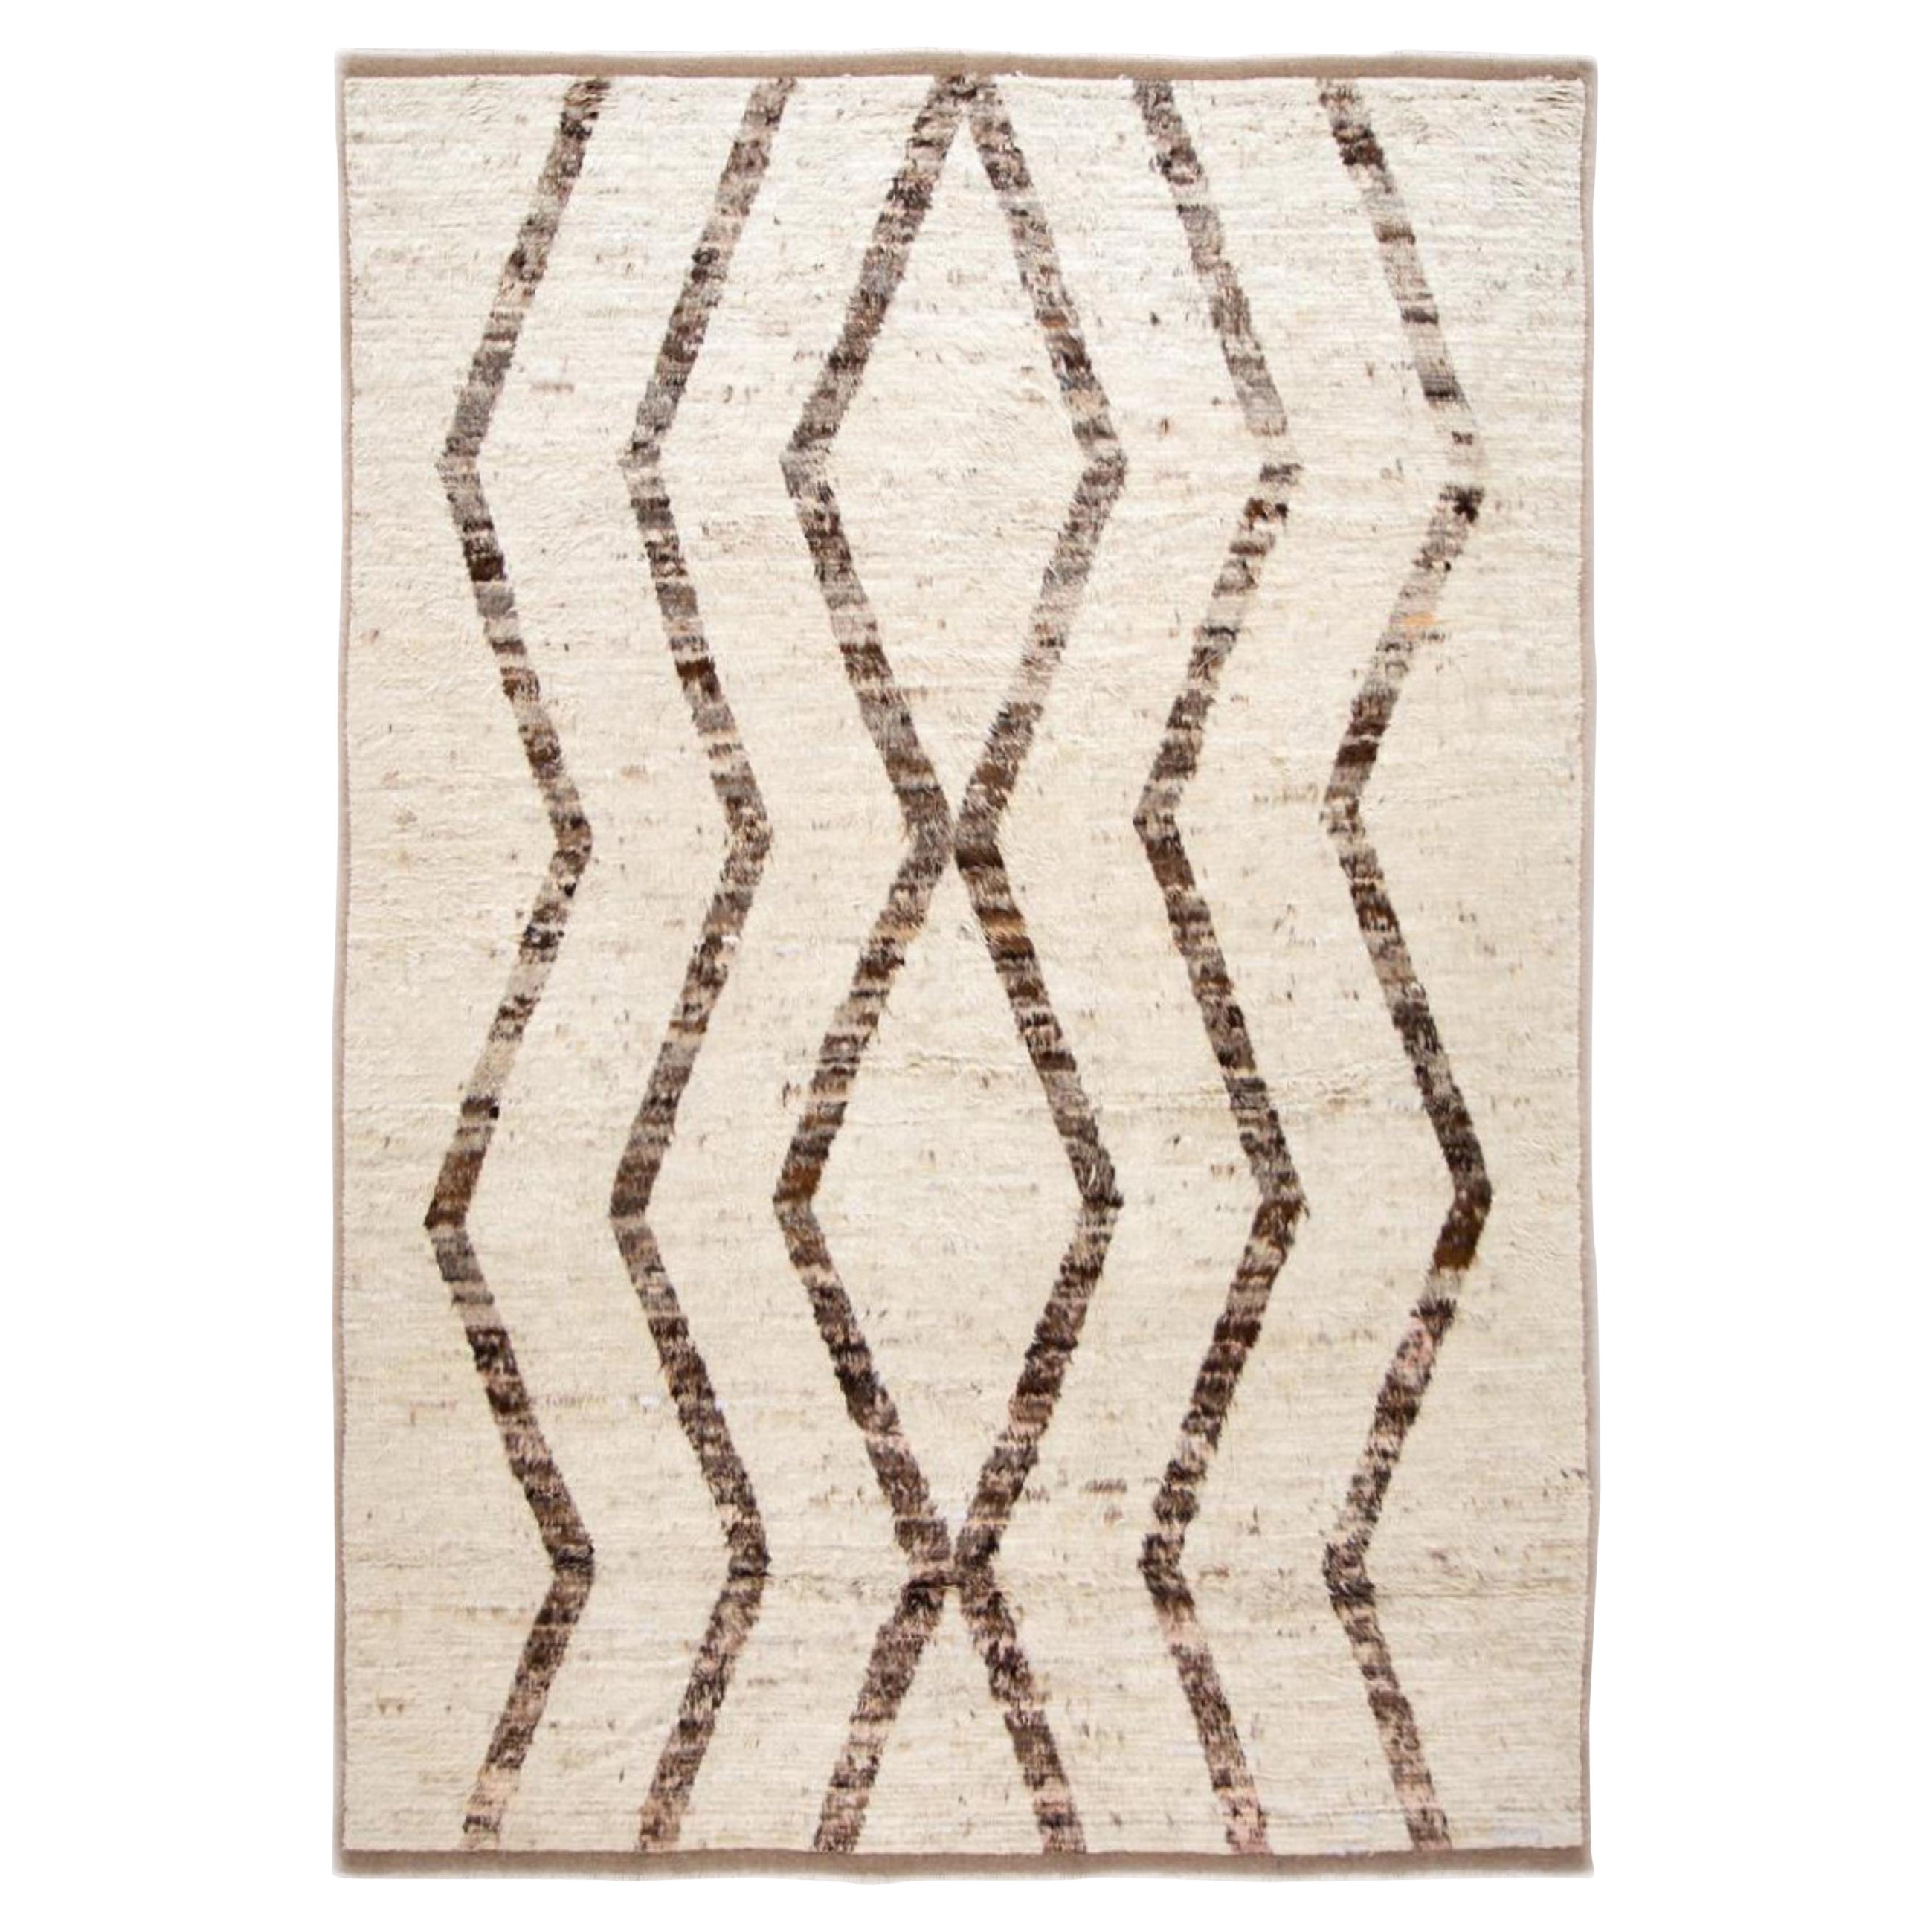 Handmade Modern Moroccan Style Wool Rug With Tribal Design In Beige/Brown For Sale